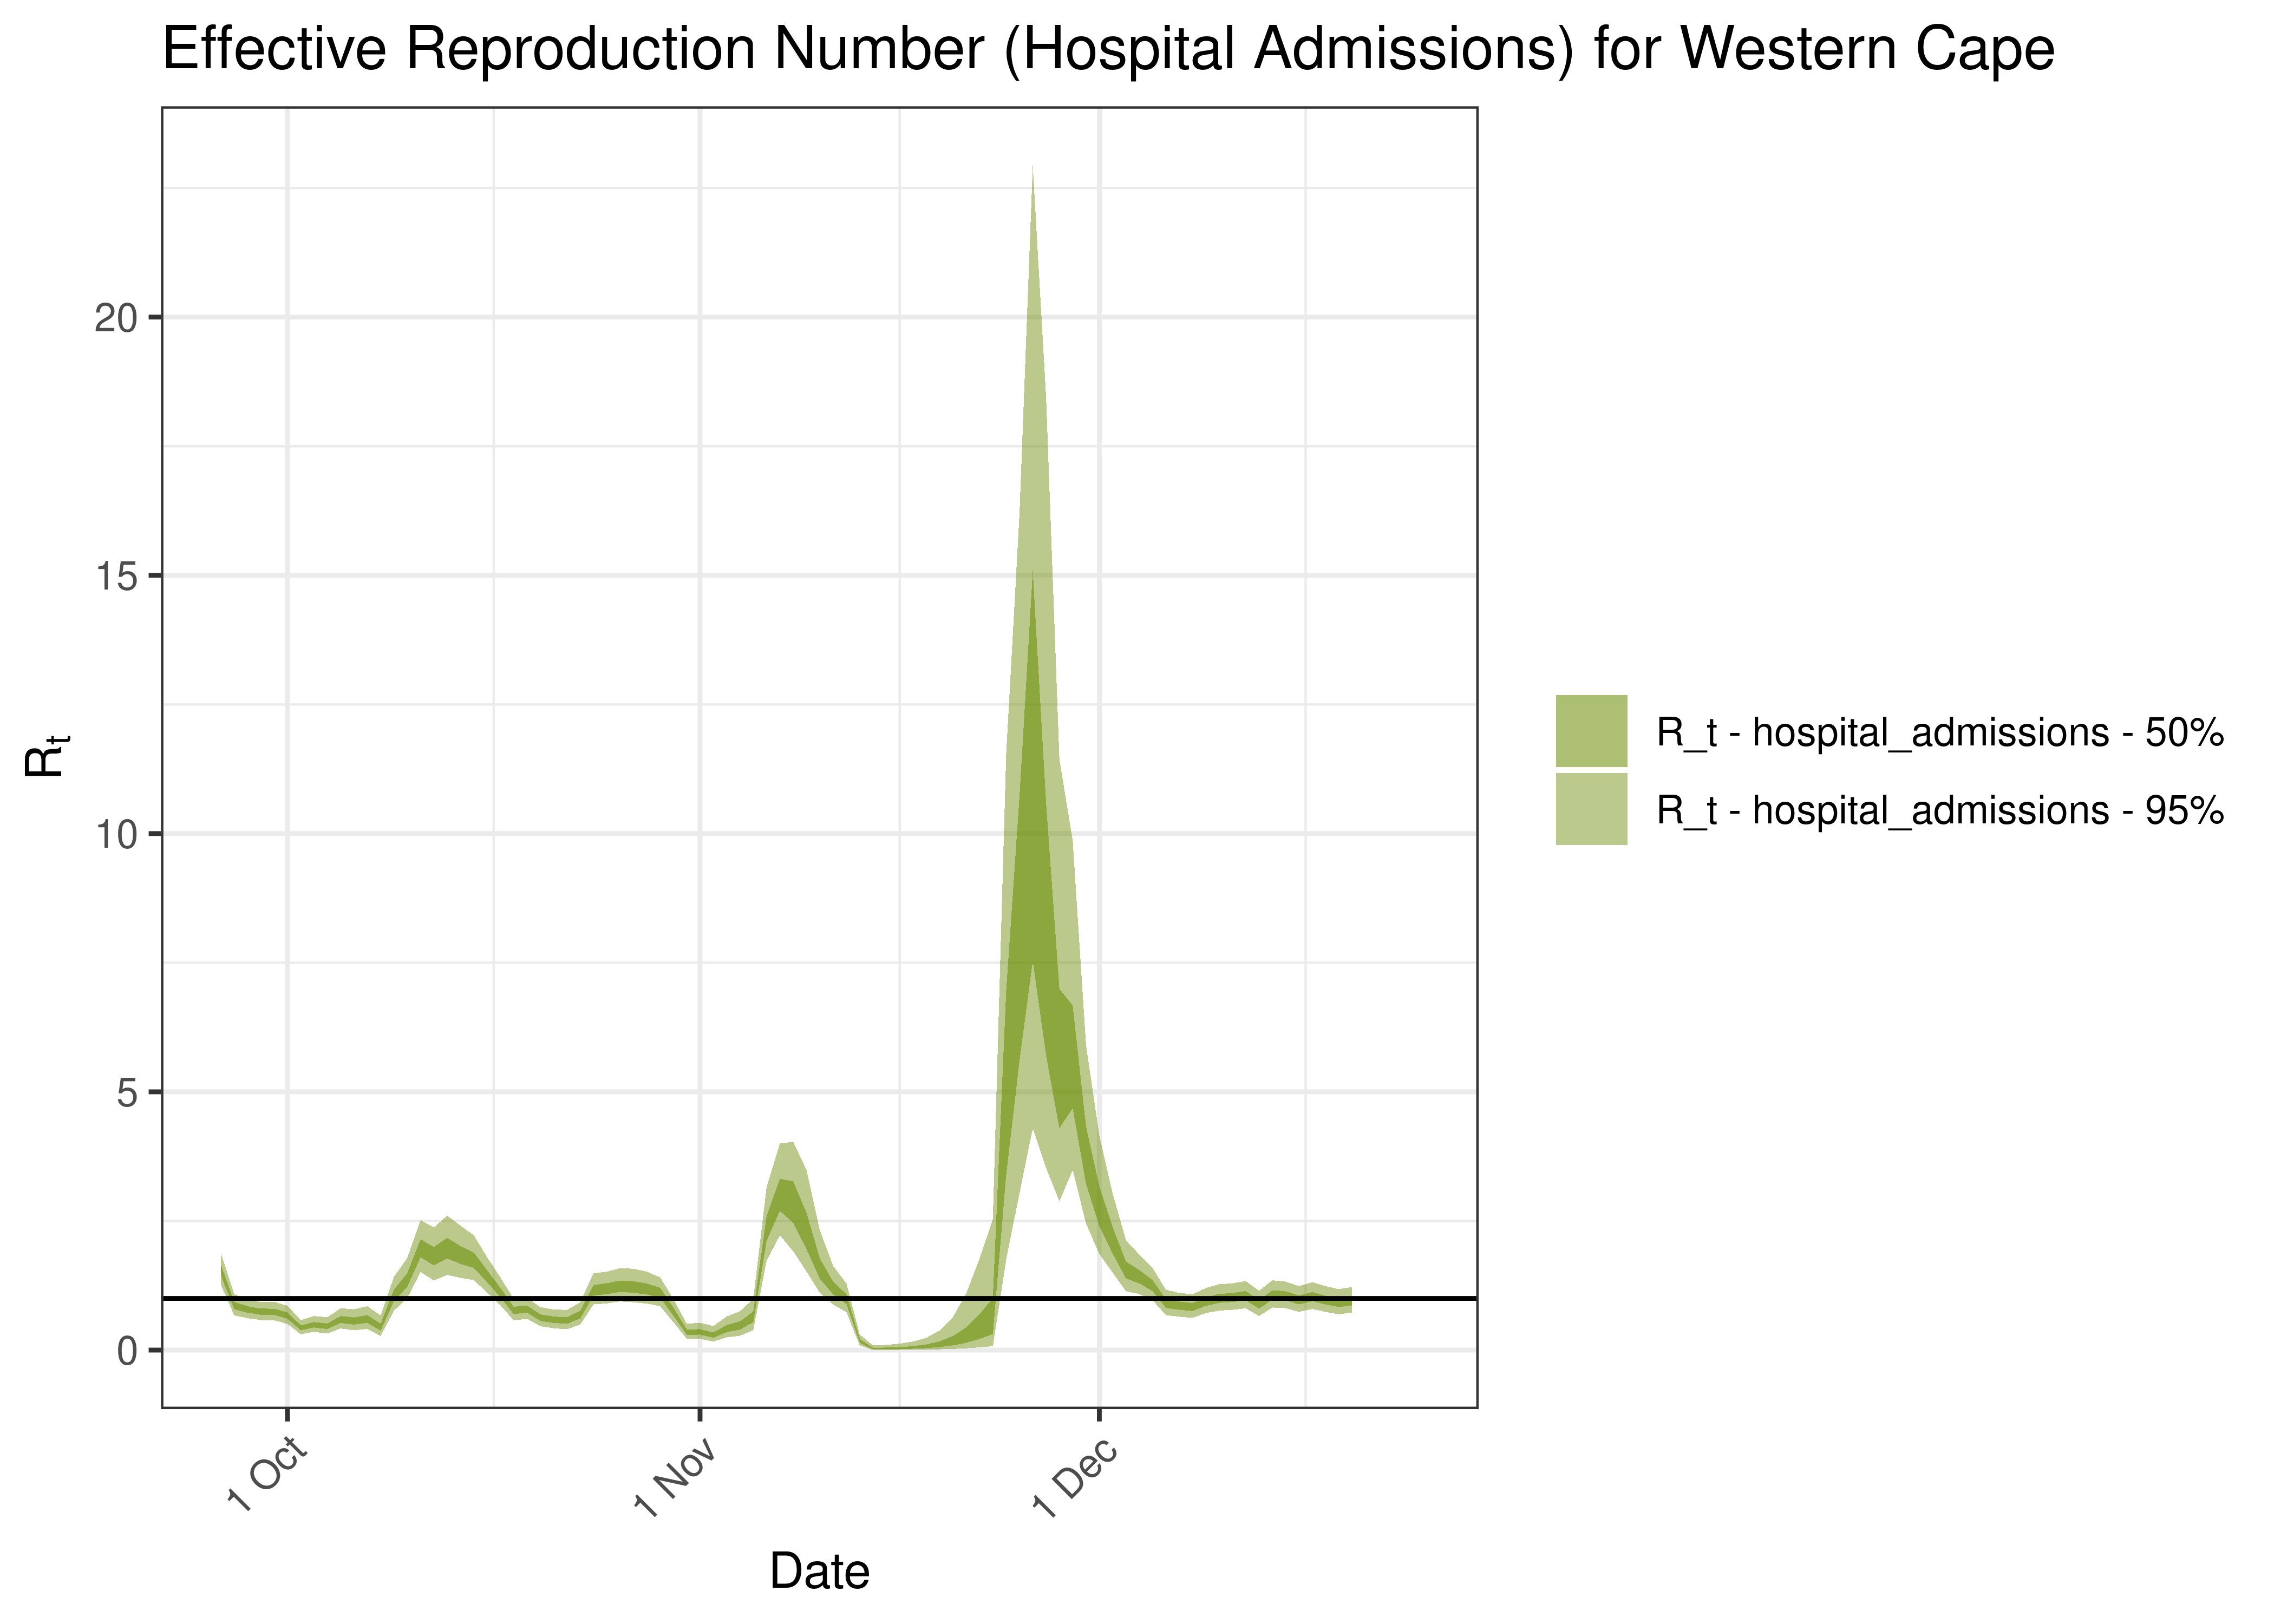 Estimated Effective Reproduction Number Based on Hospital Admissions for Western Cape over last 90 days